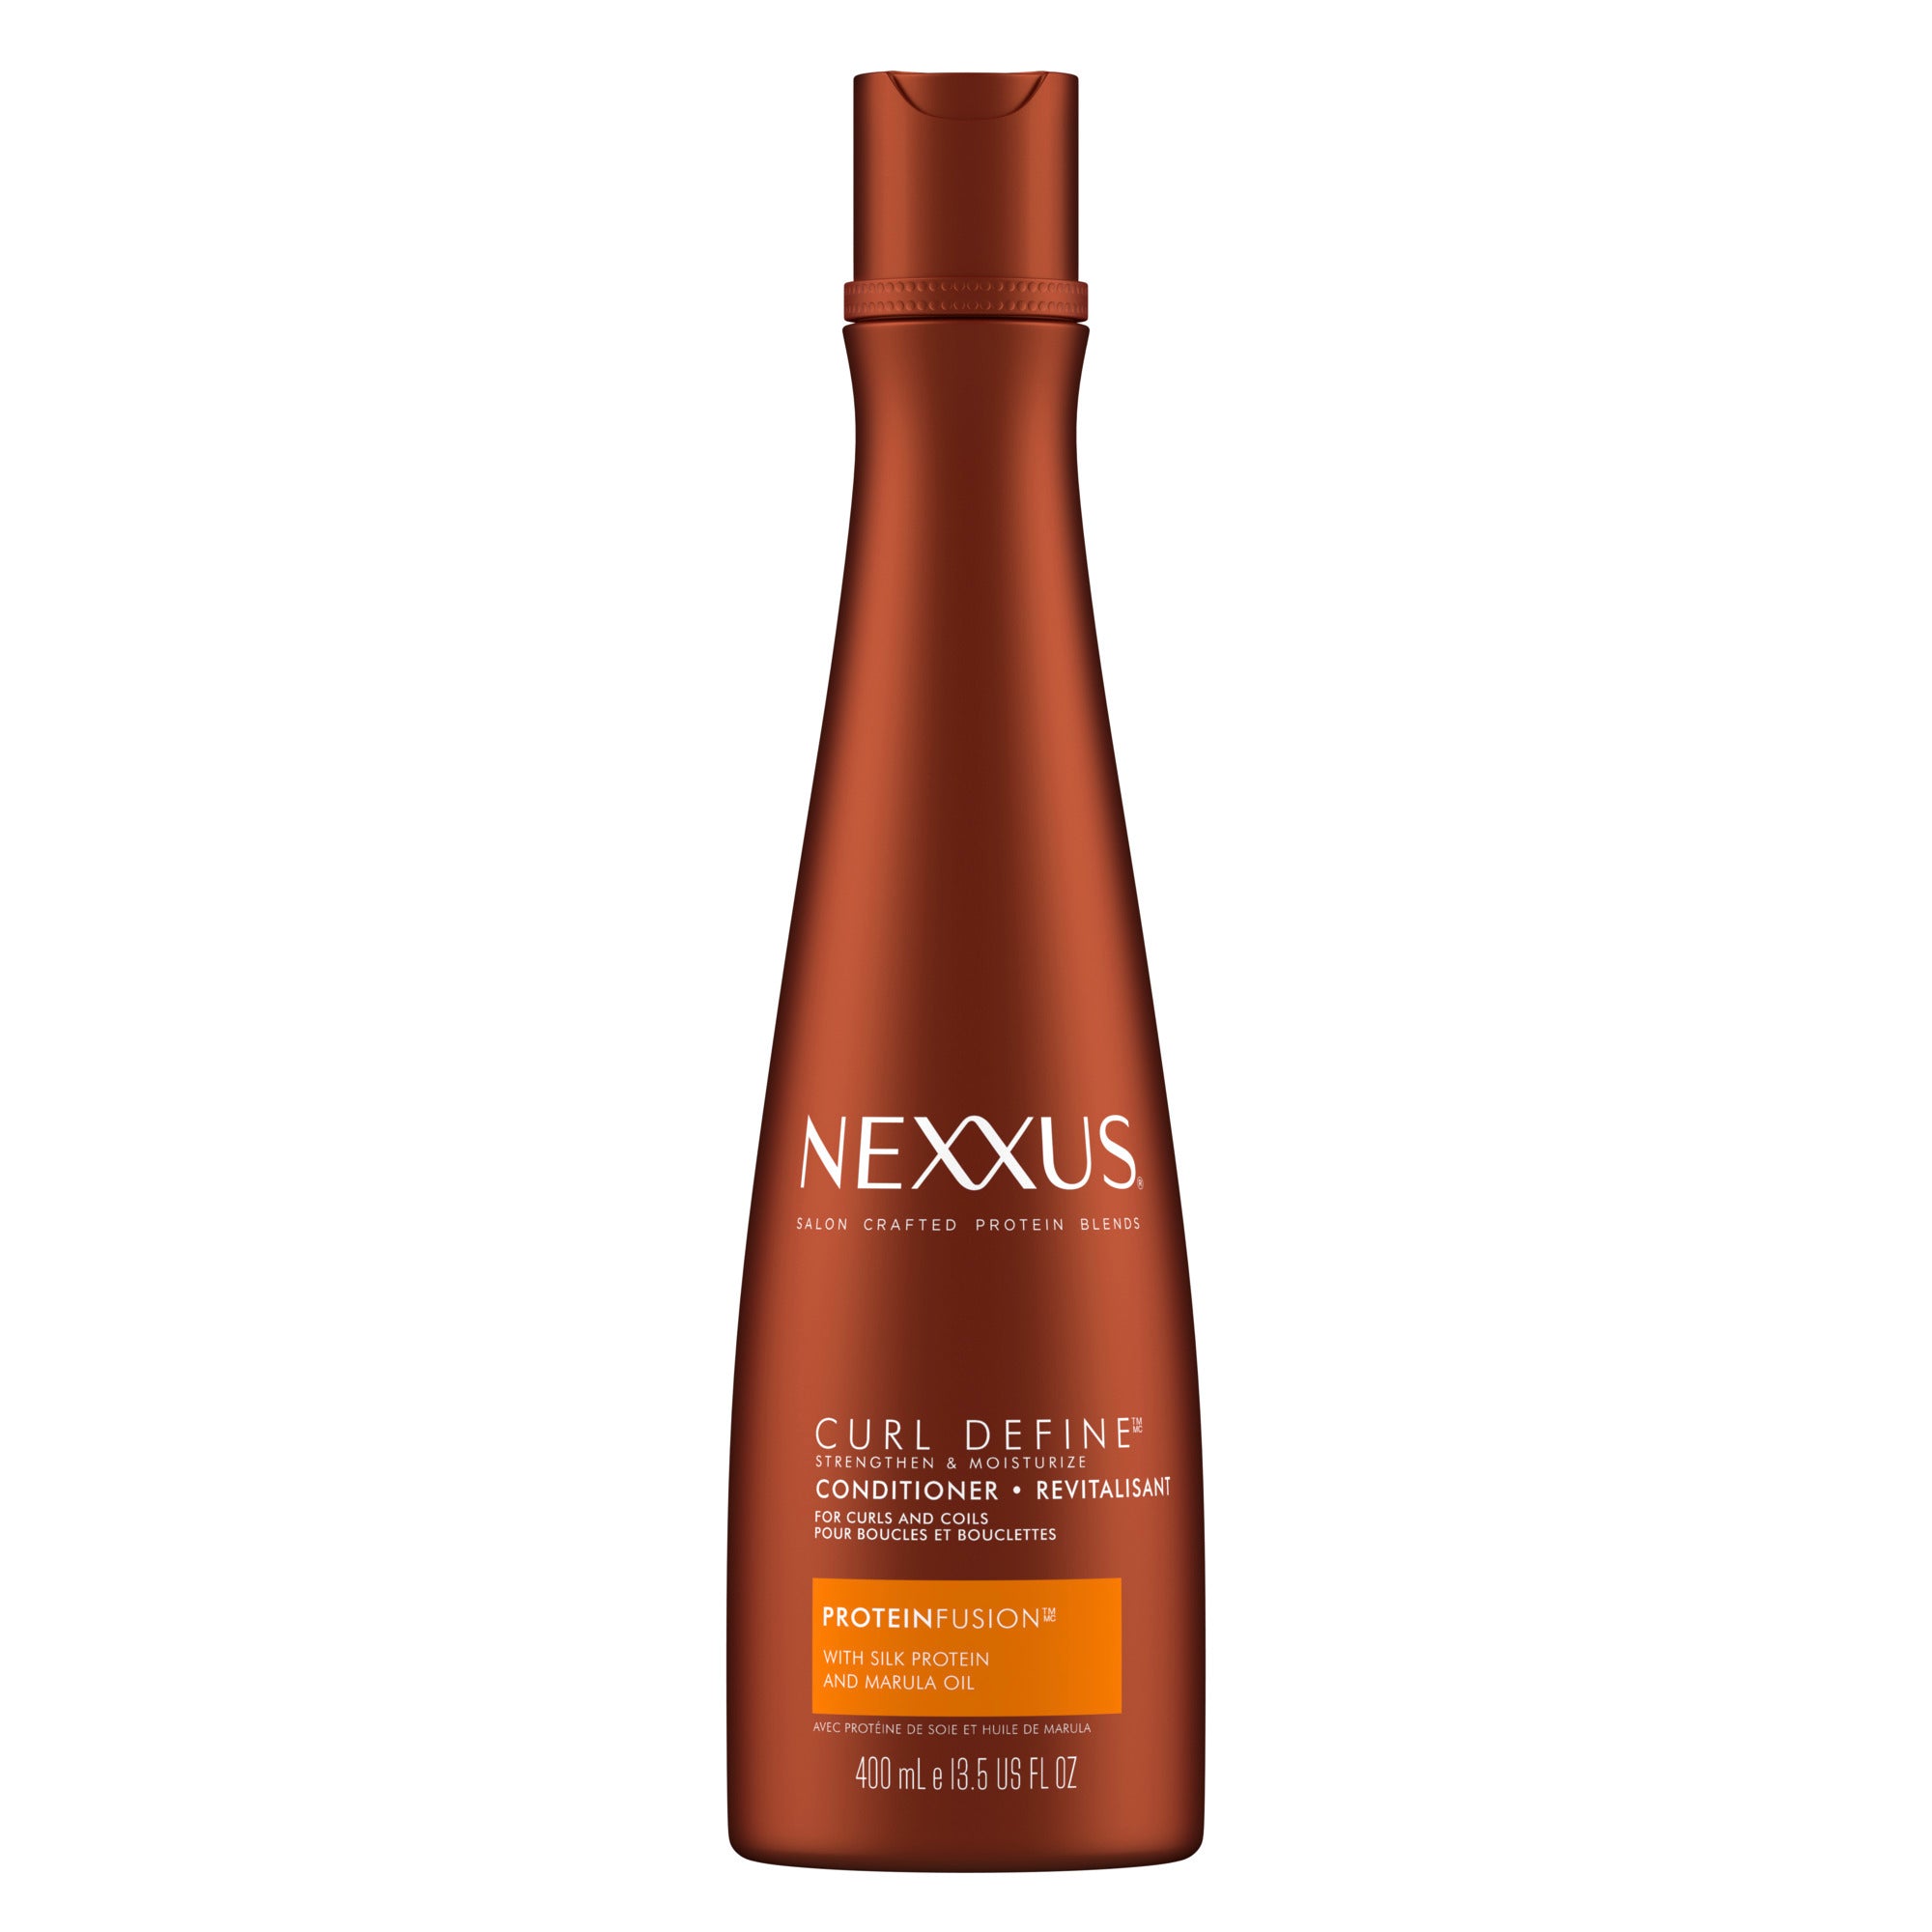 Showing the front angle view of the Nexxus Curl Define Conditioner 400ml product.